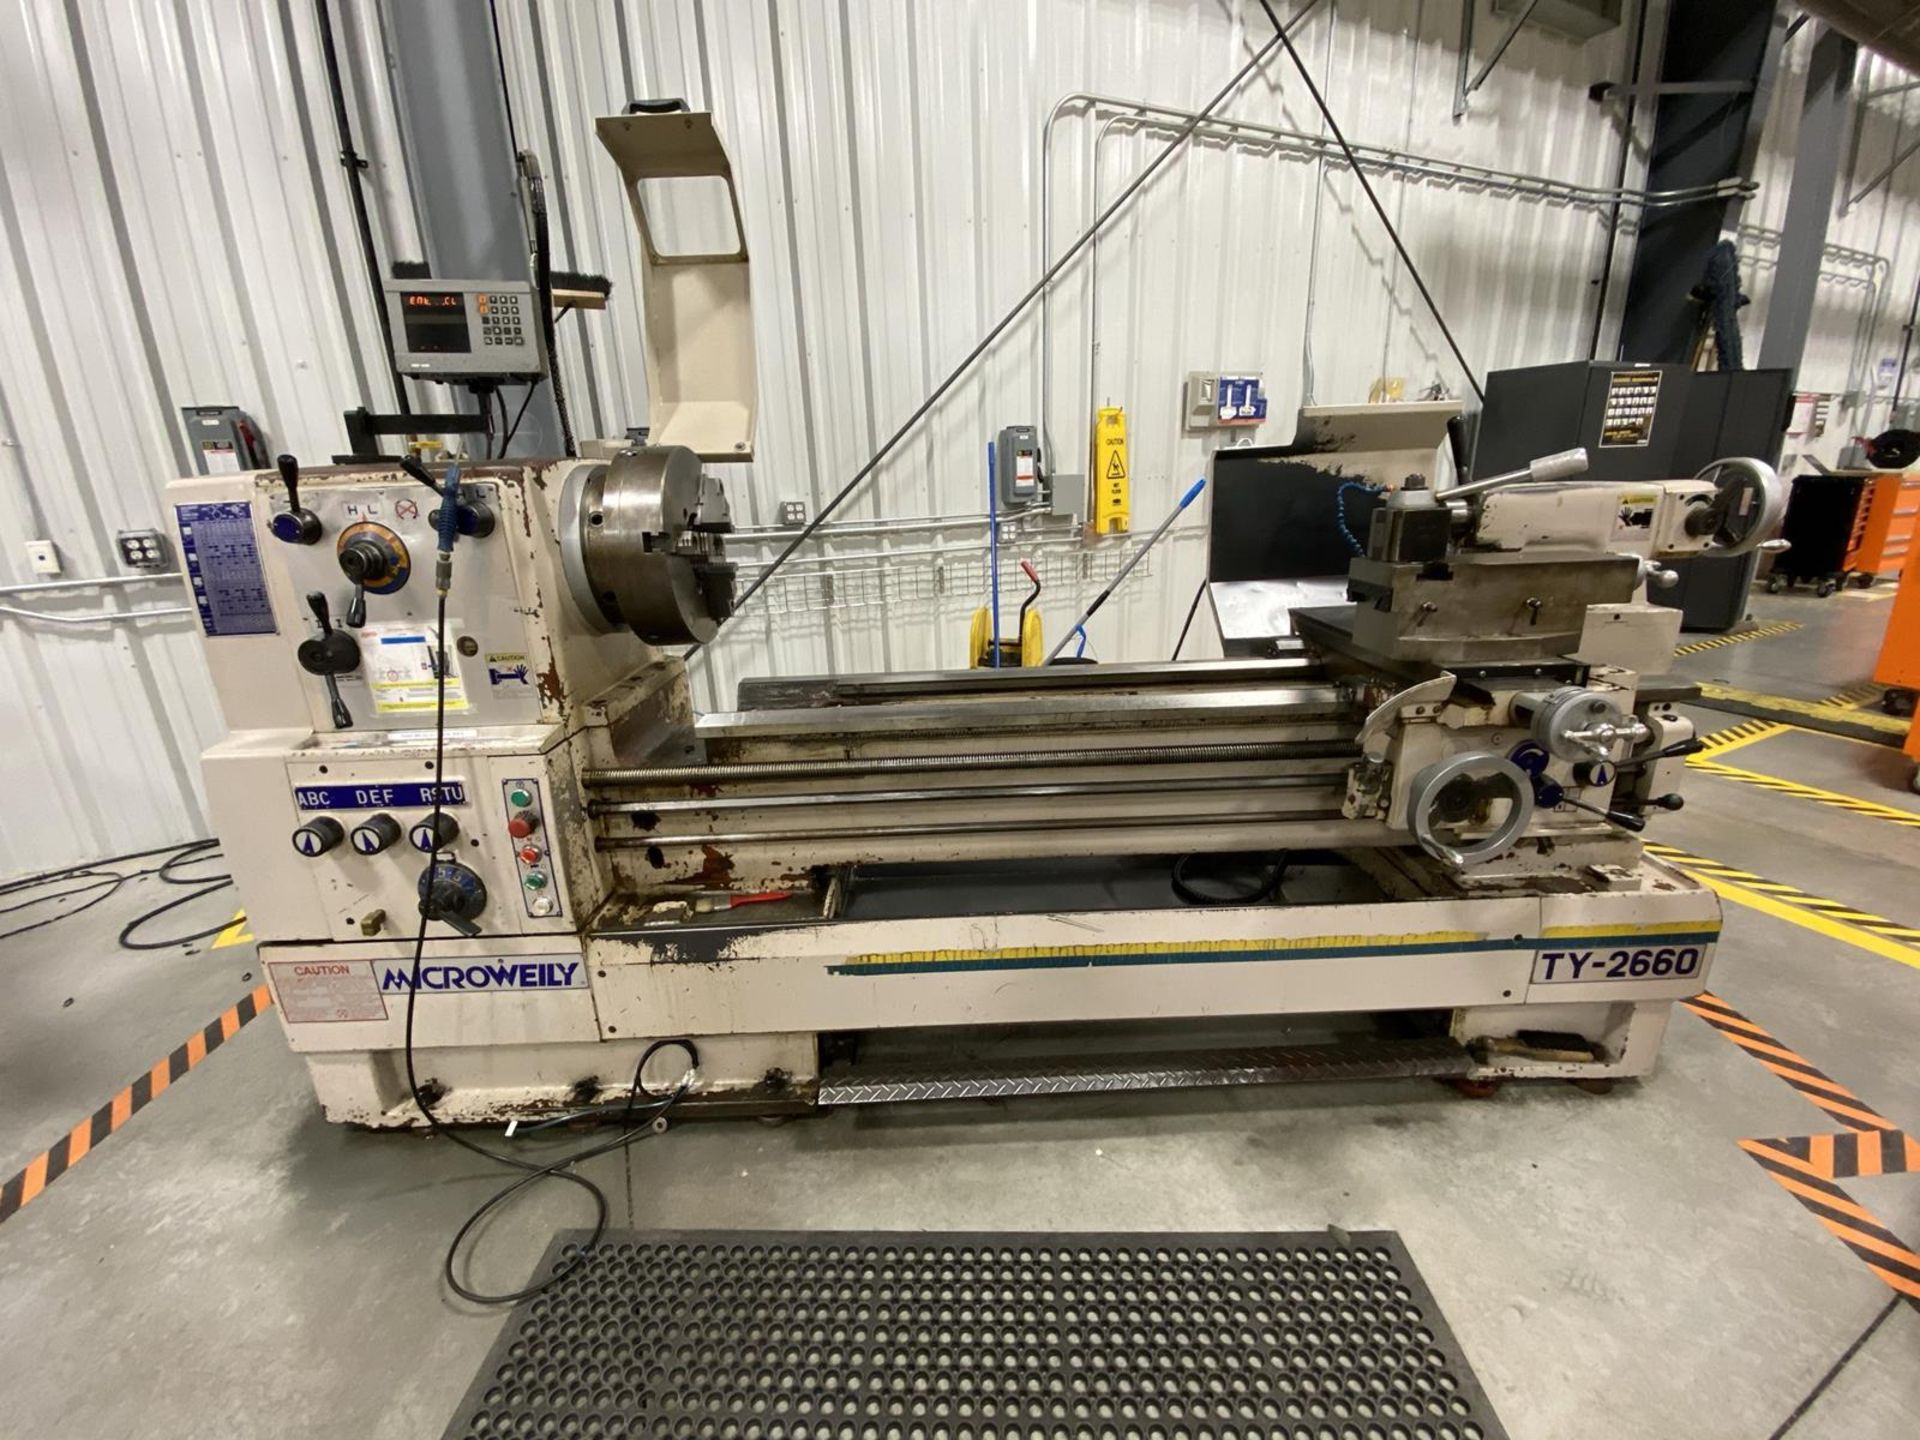 MICROWEILY, TY-2660, 26" X 60", GAP BED, ENGINE LATHE, 15-860 RPM, SWING OVER CROSS SLIDE 18", SWING